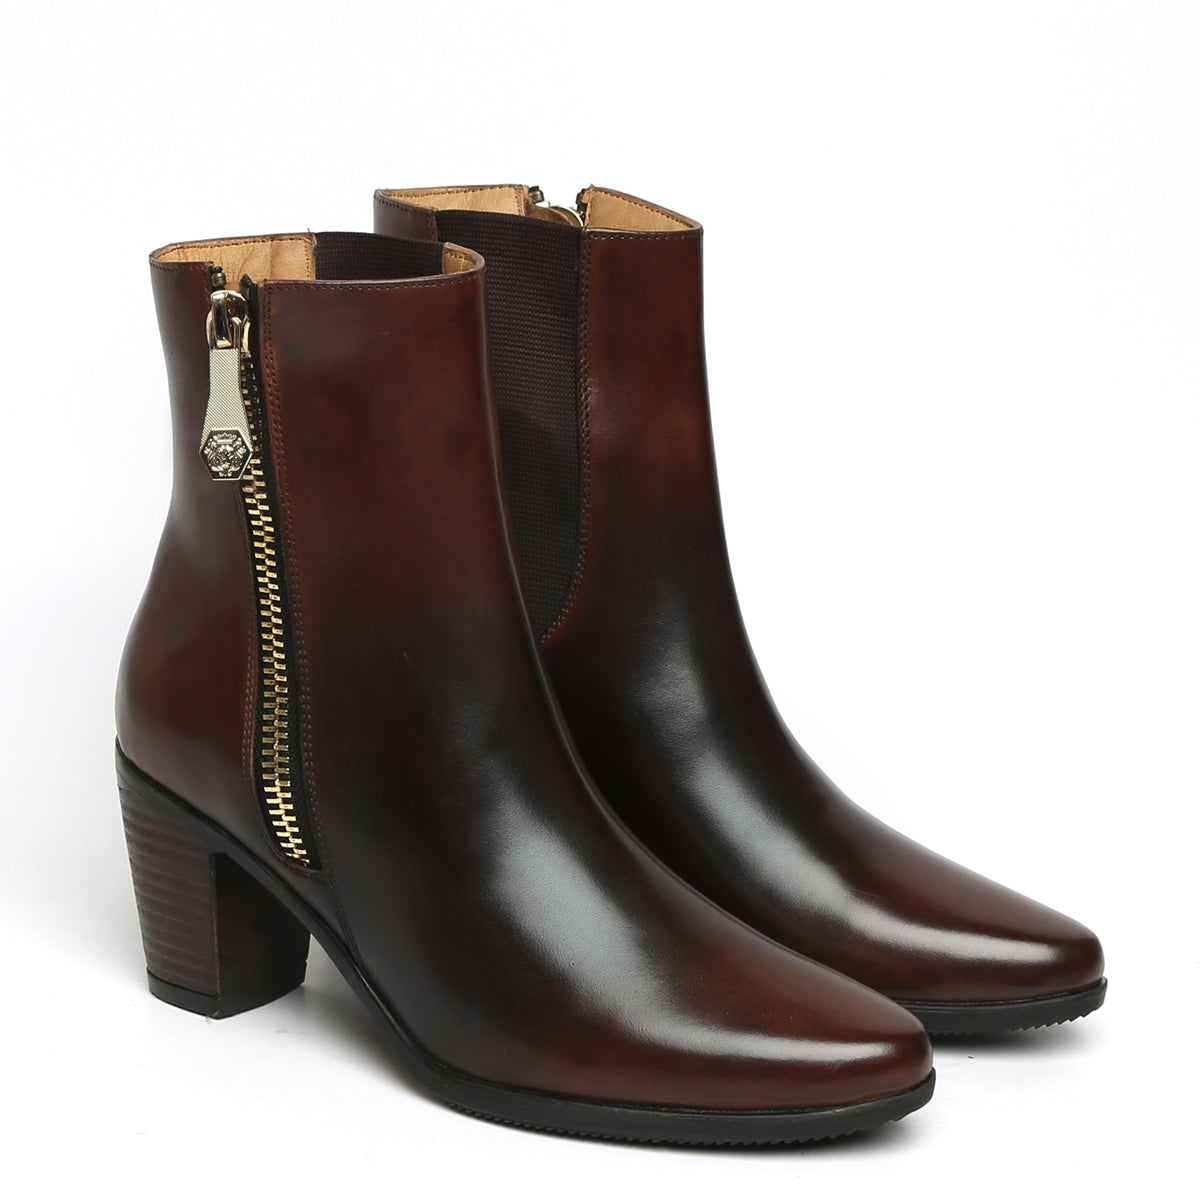 Smudged Dark Brown Dual Tone Leather Boots By Brune & Bareskin